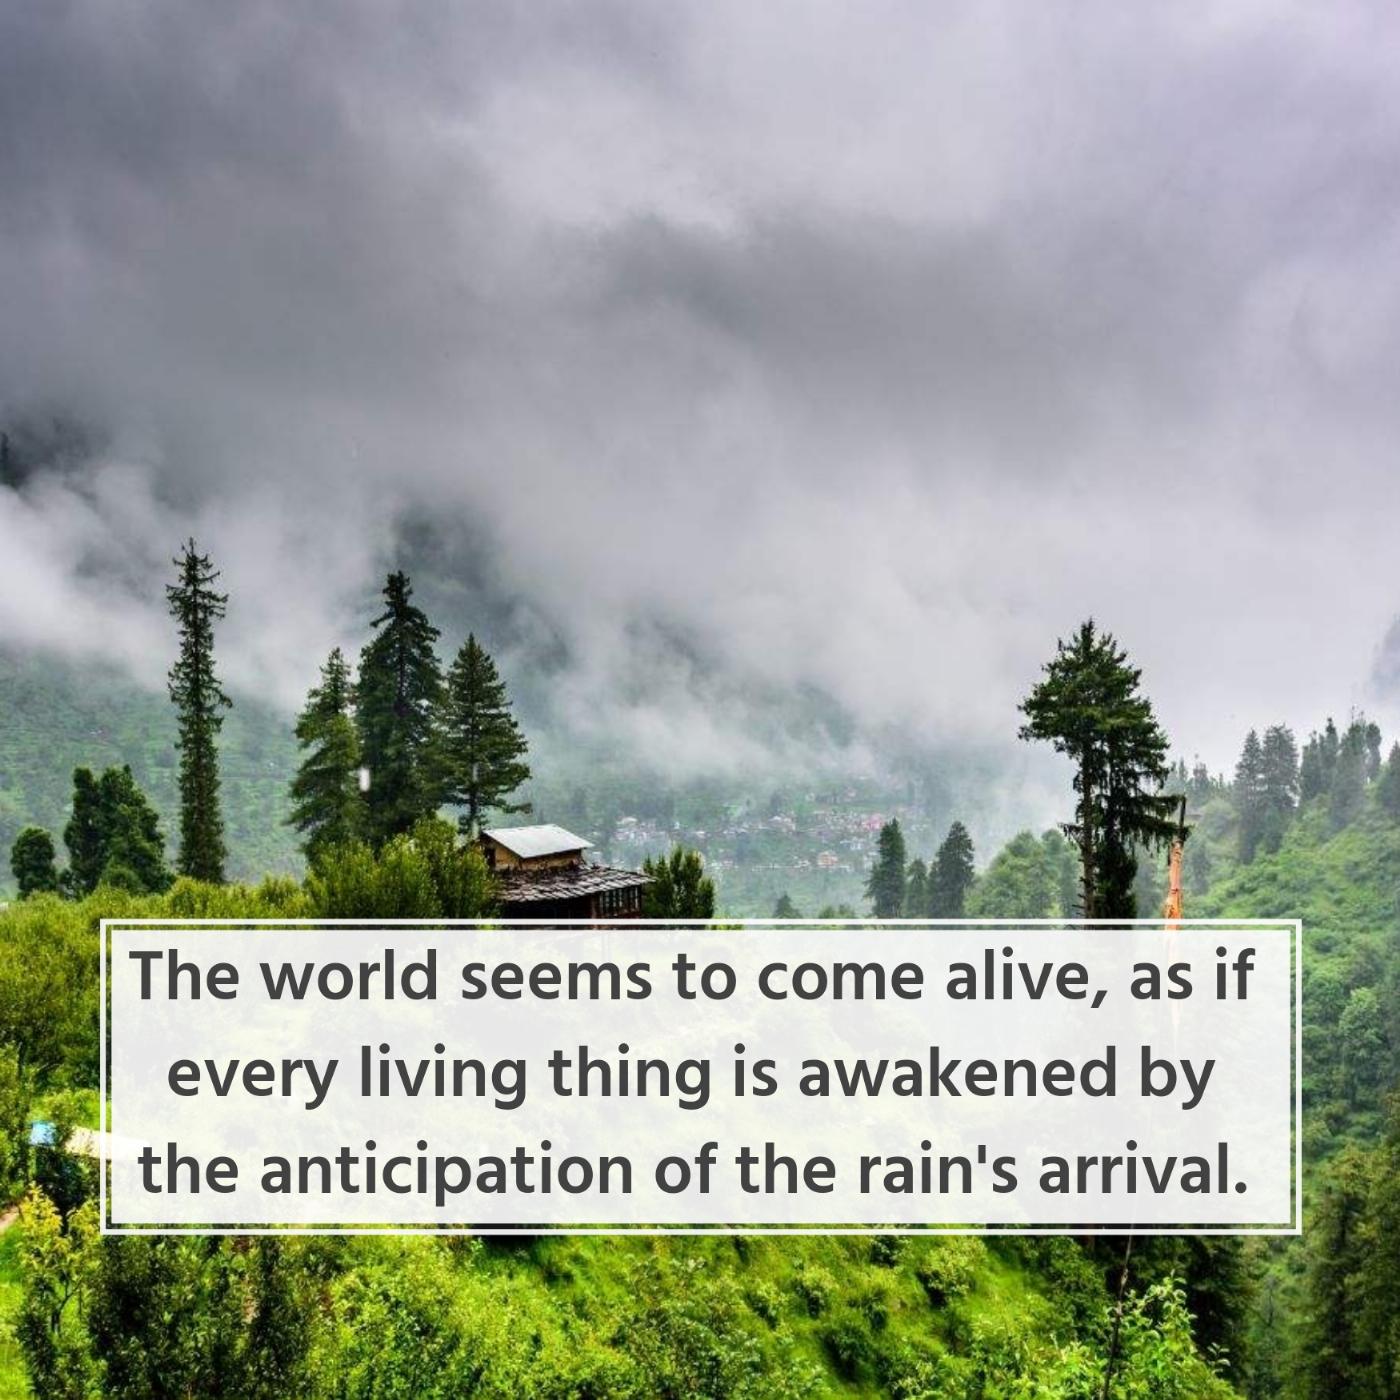 The world seems to come alive as if every living thing is awakened